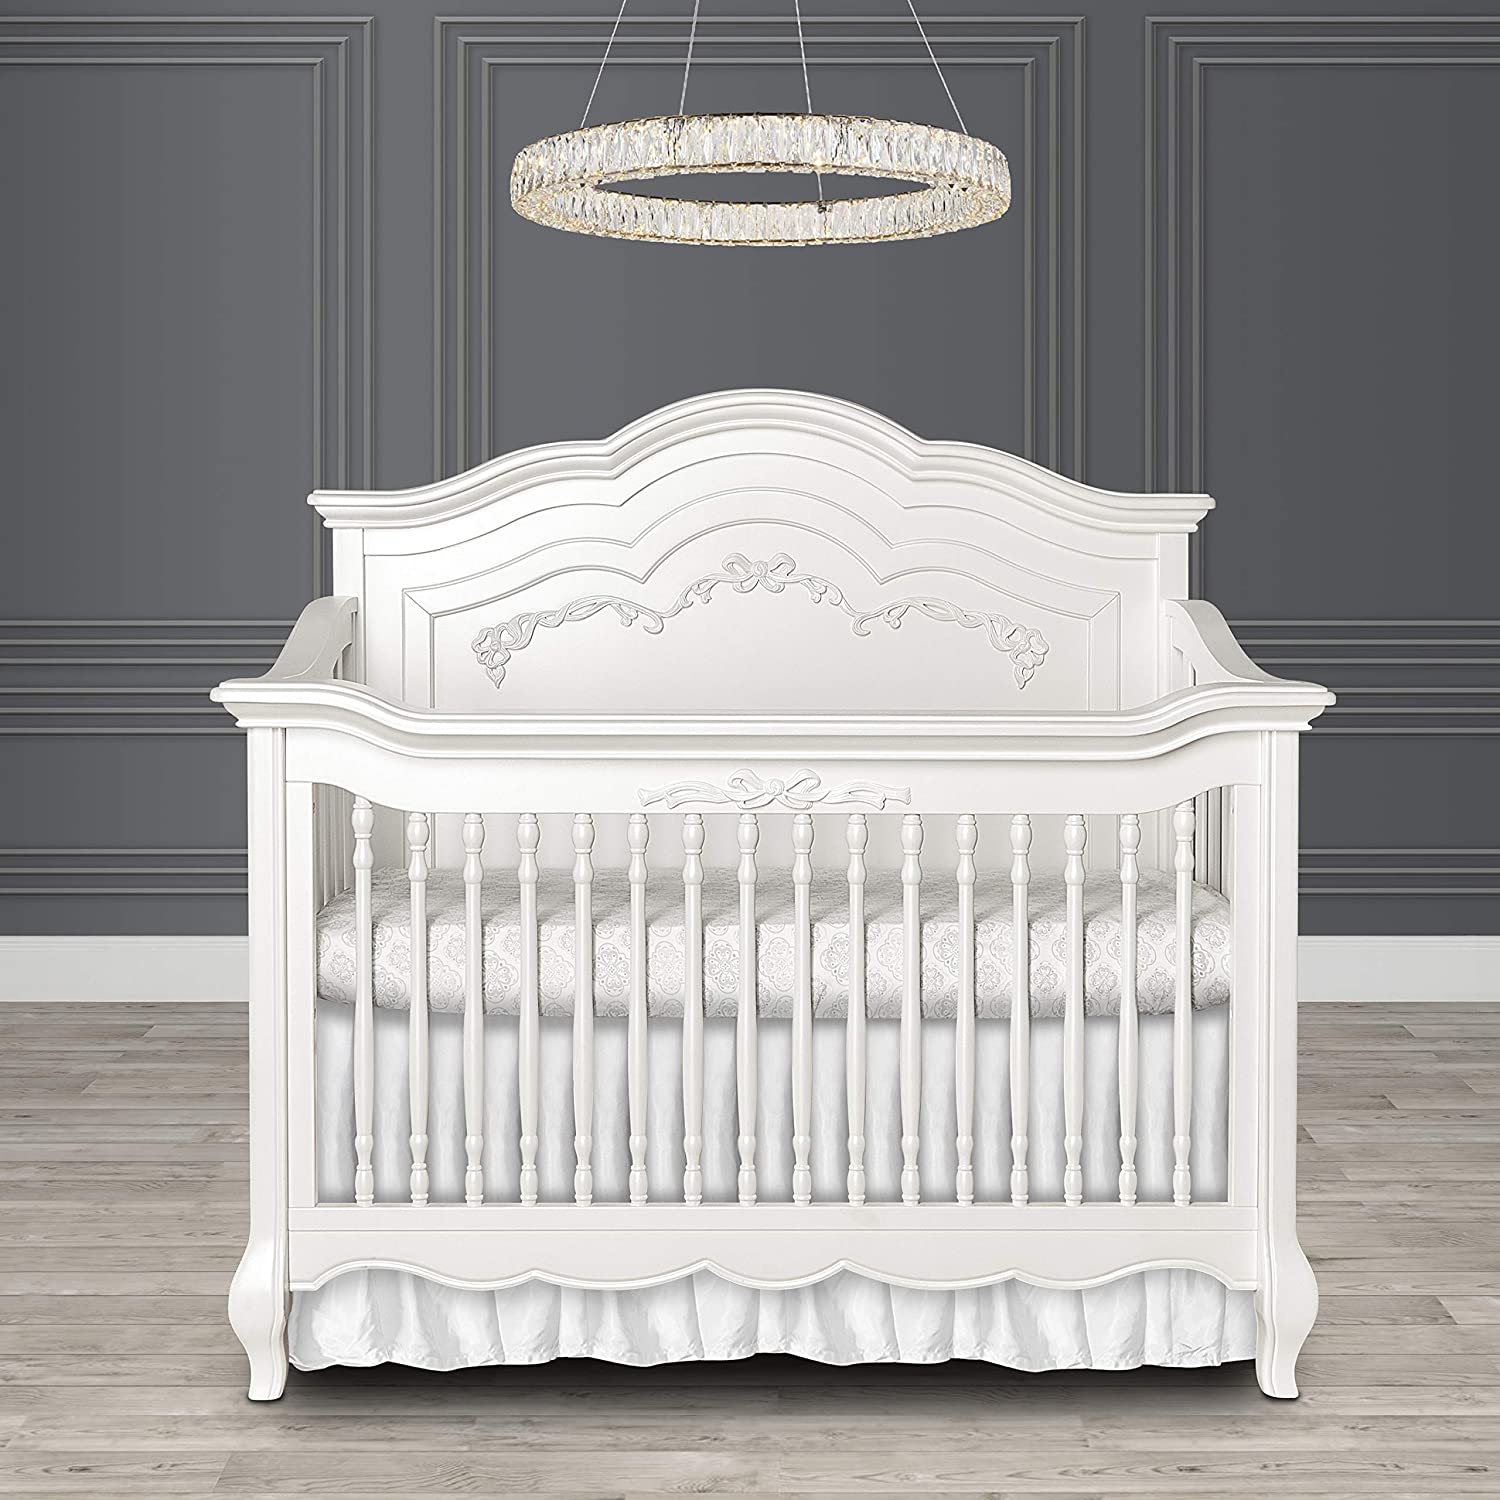 5 in 1 Curved Convertible Crib I Fairytale Nursery, Frost